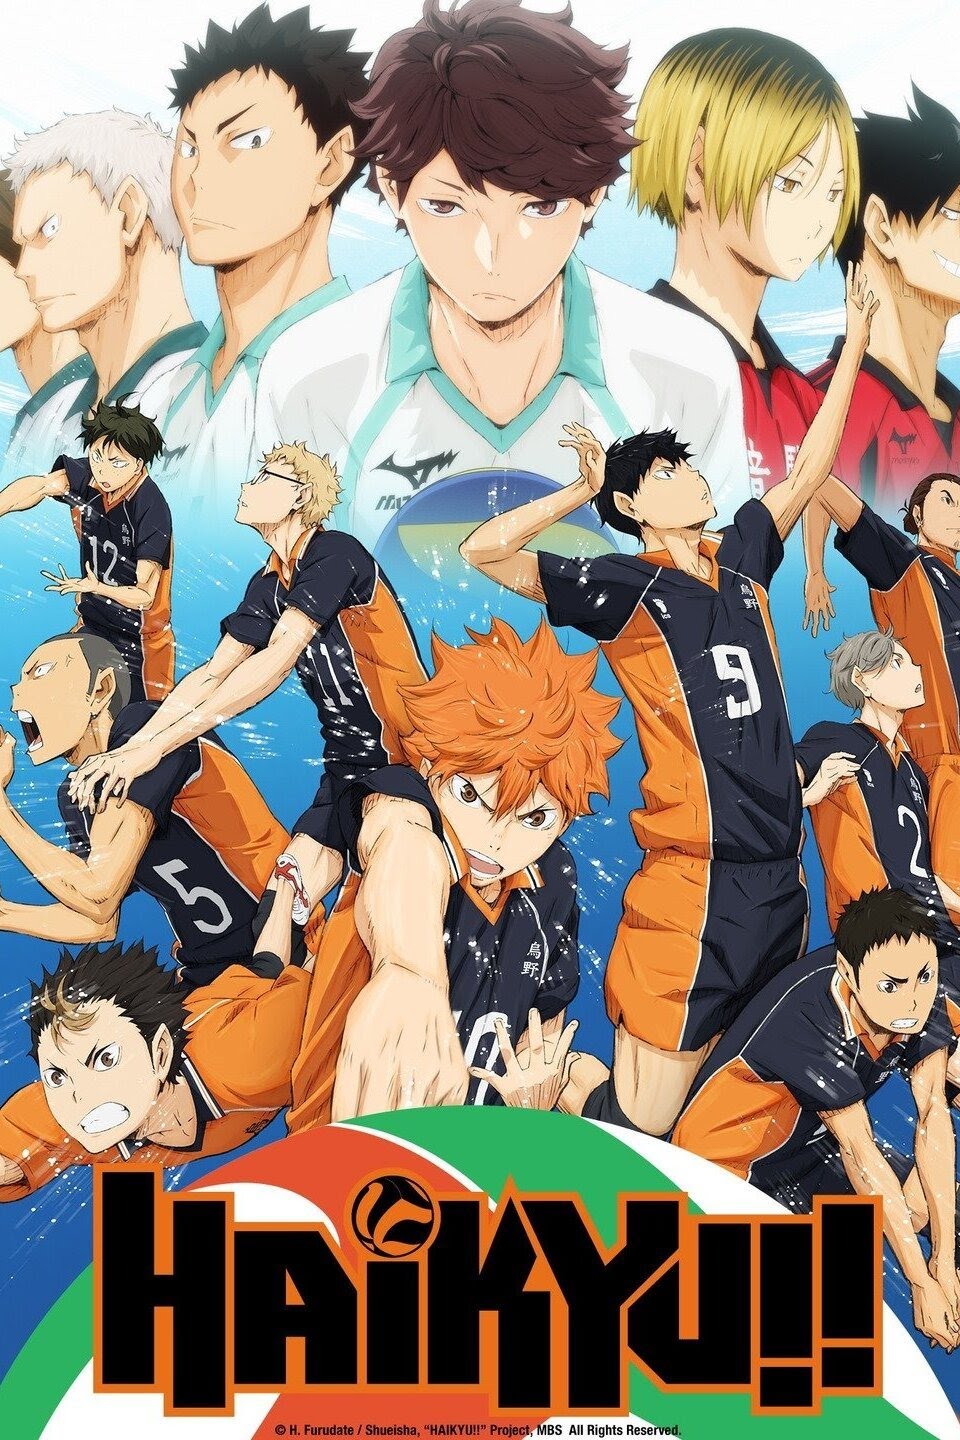 After the Haikyuu New Movie, will there be another Anime season 5?